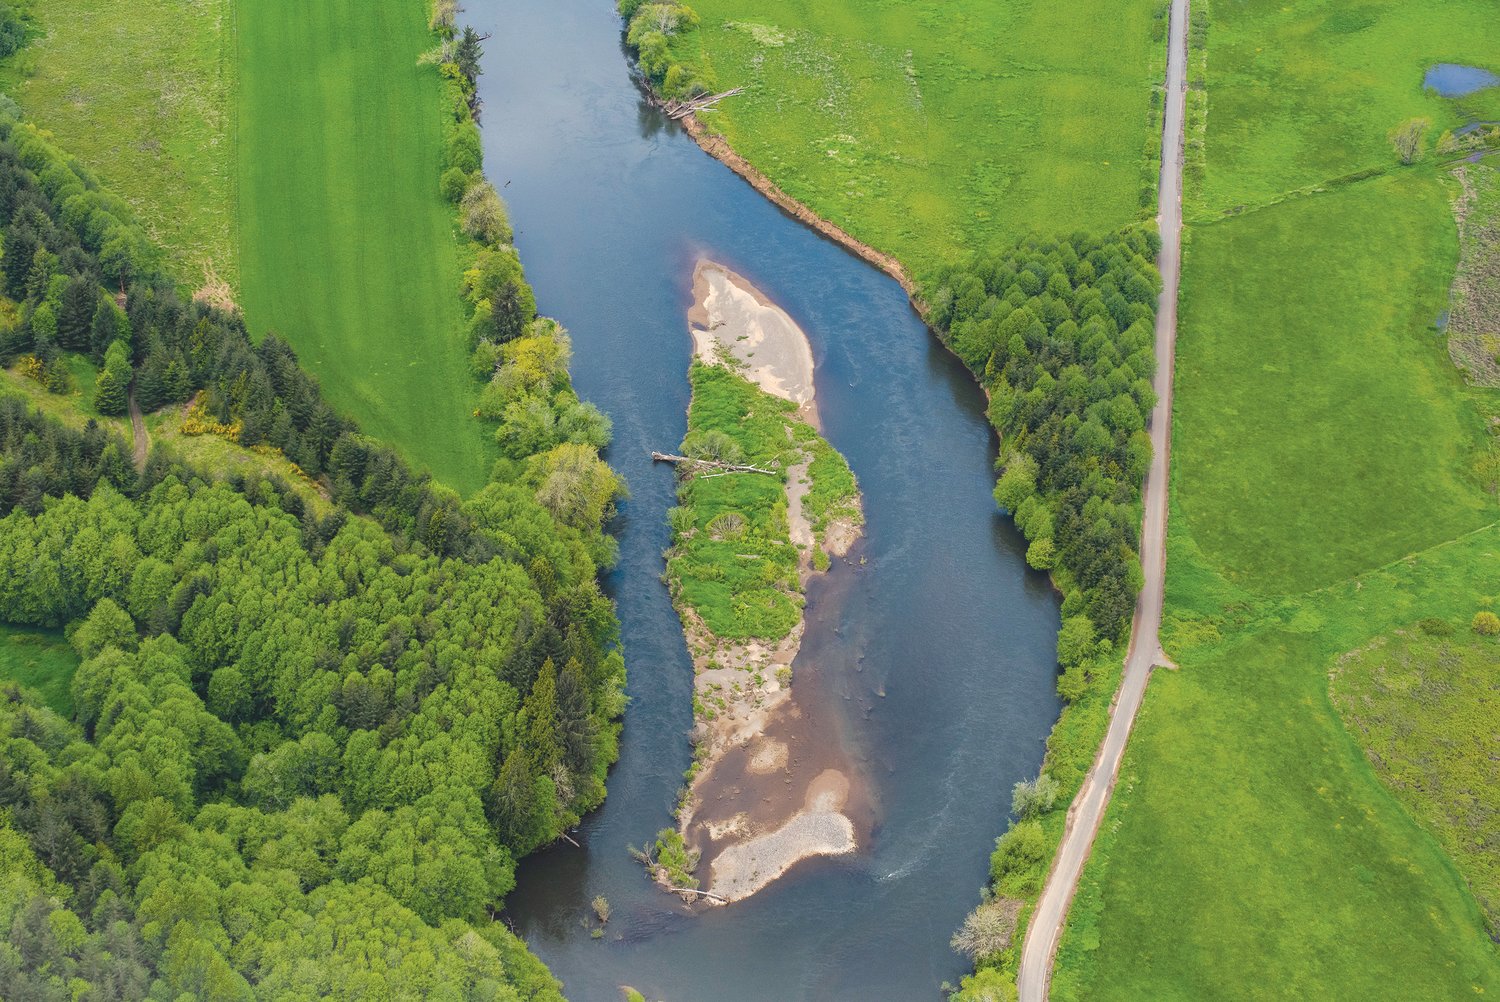 The Chehalis River is seen from above. Woody debris and noxious weeds can catch on these islands formed when the river splits.